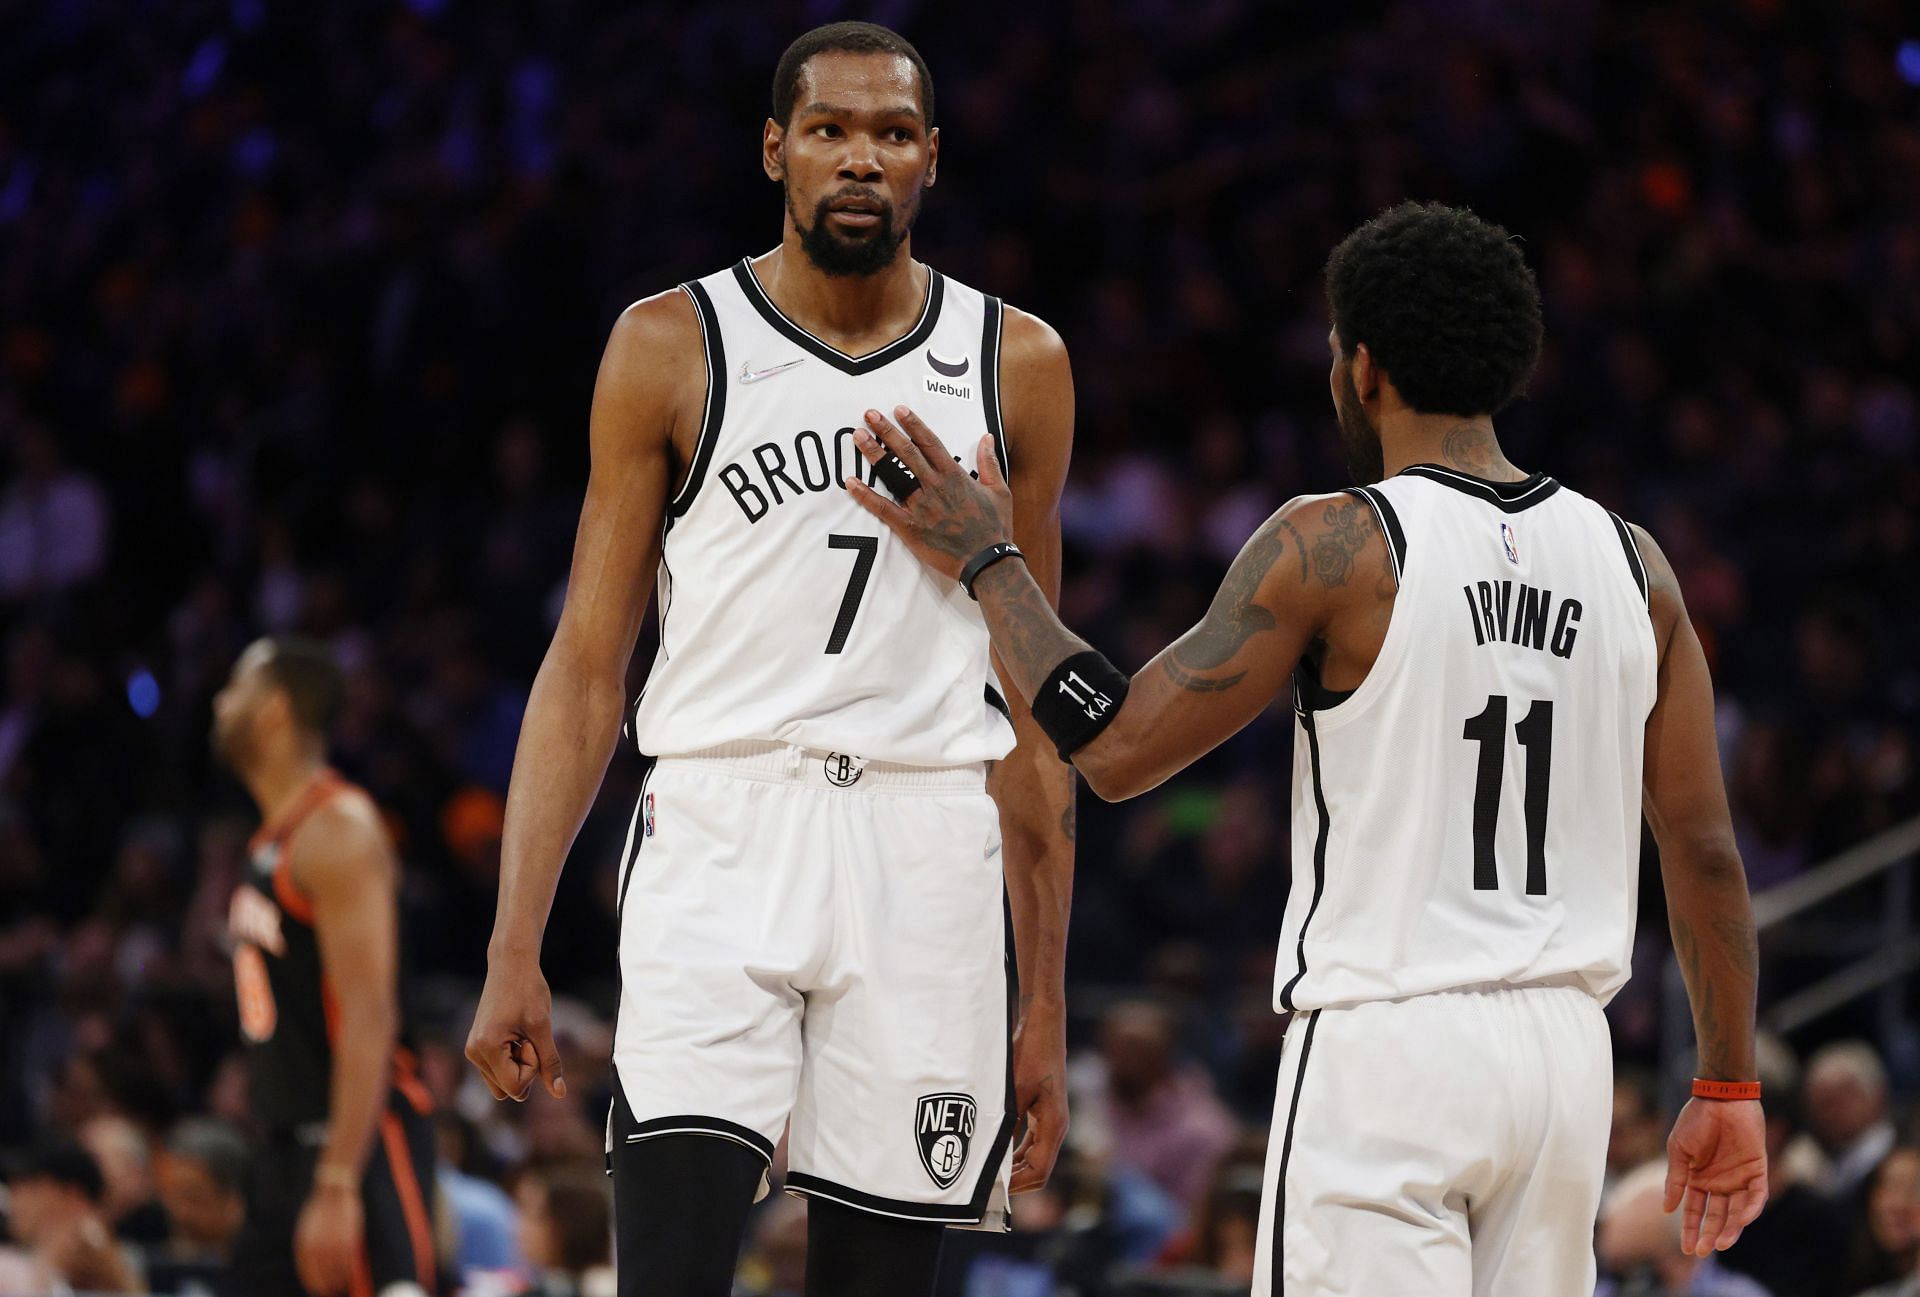 Brooklyn Nets stars Kevin Durant and Kyrie Irving in action against the New York Knicks.